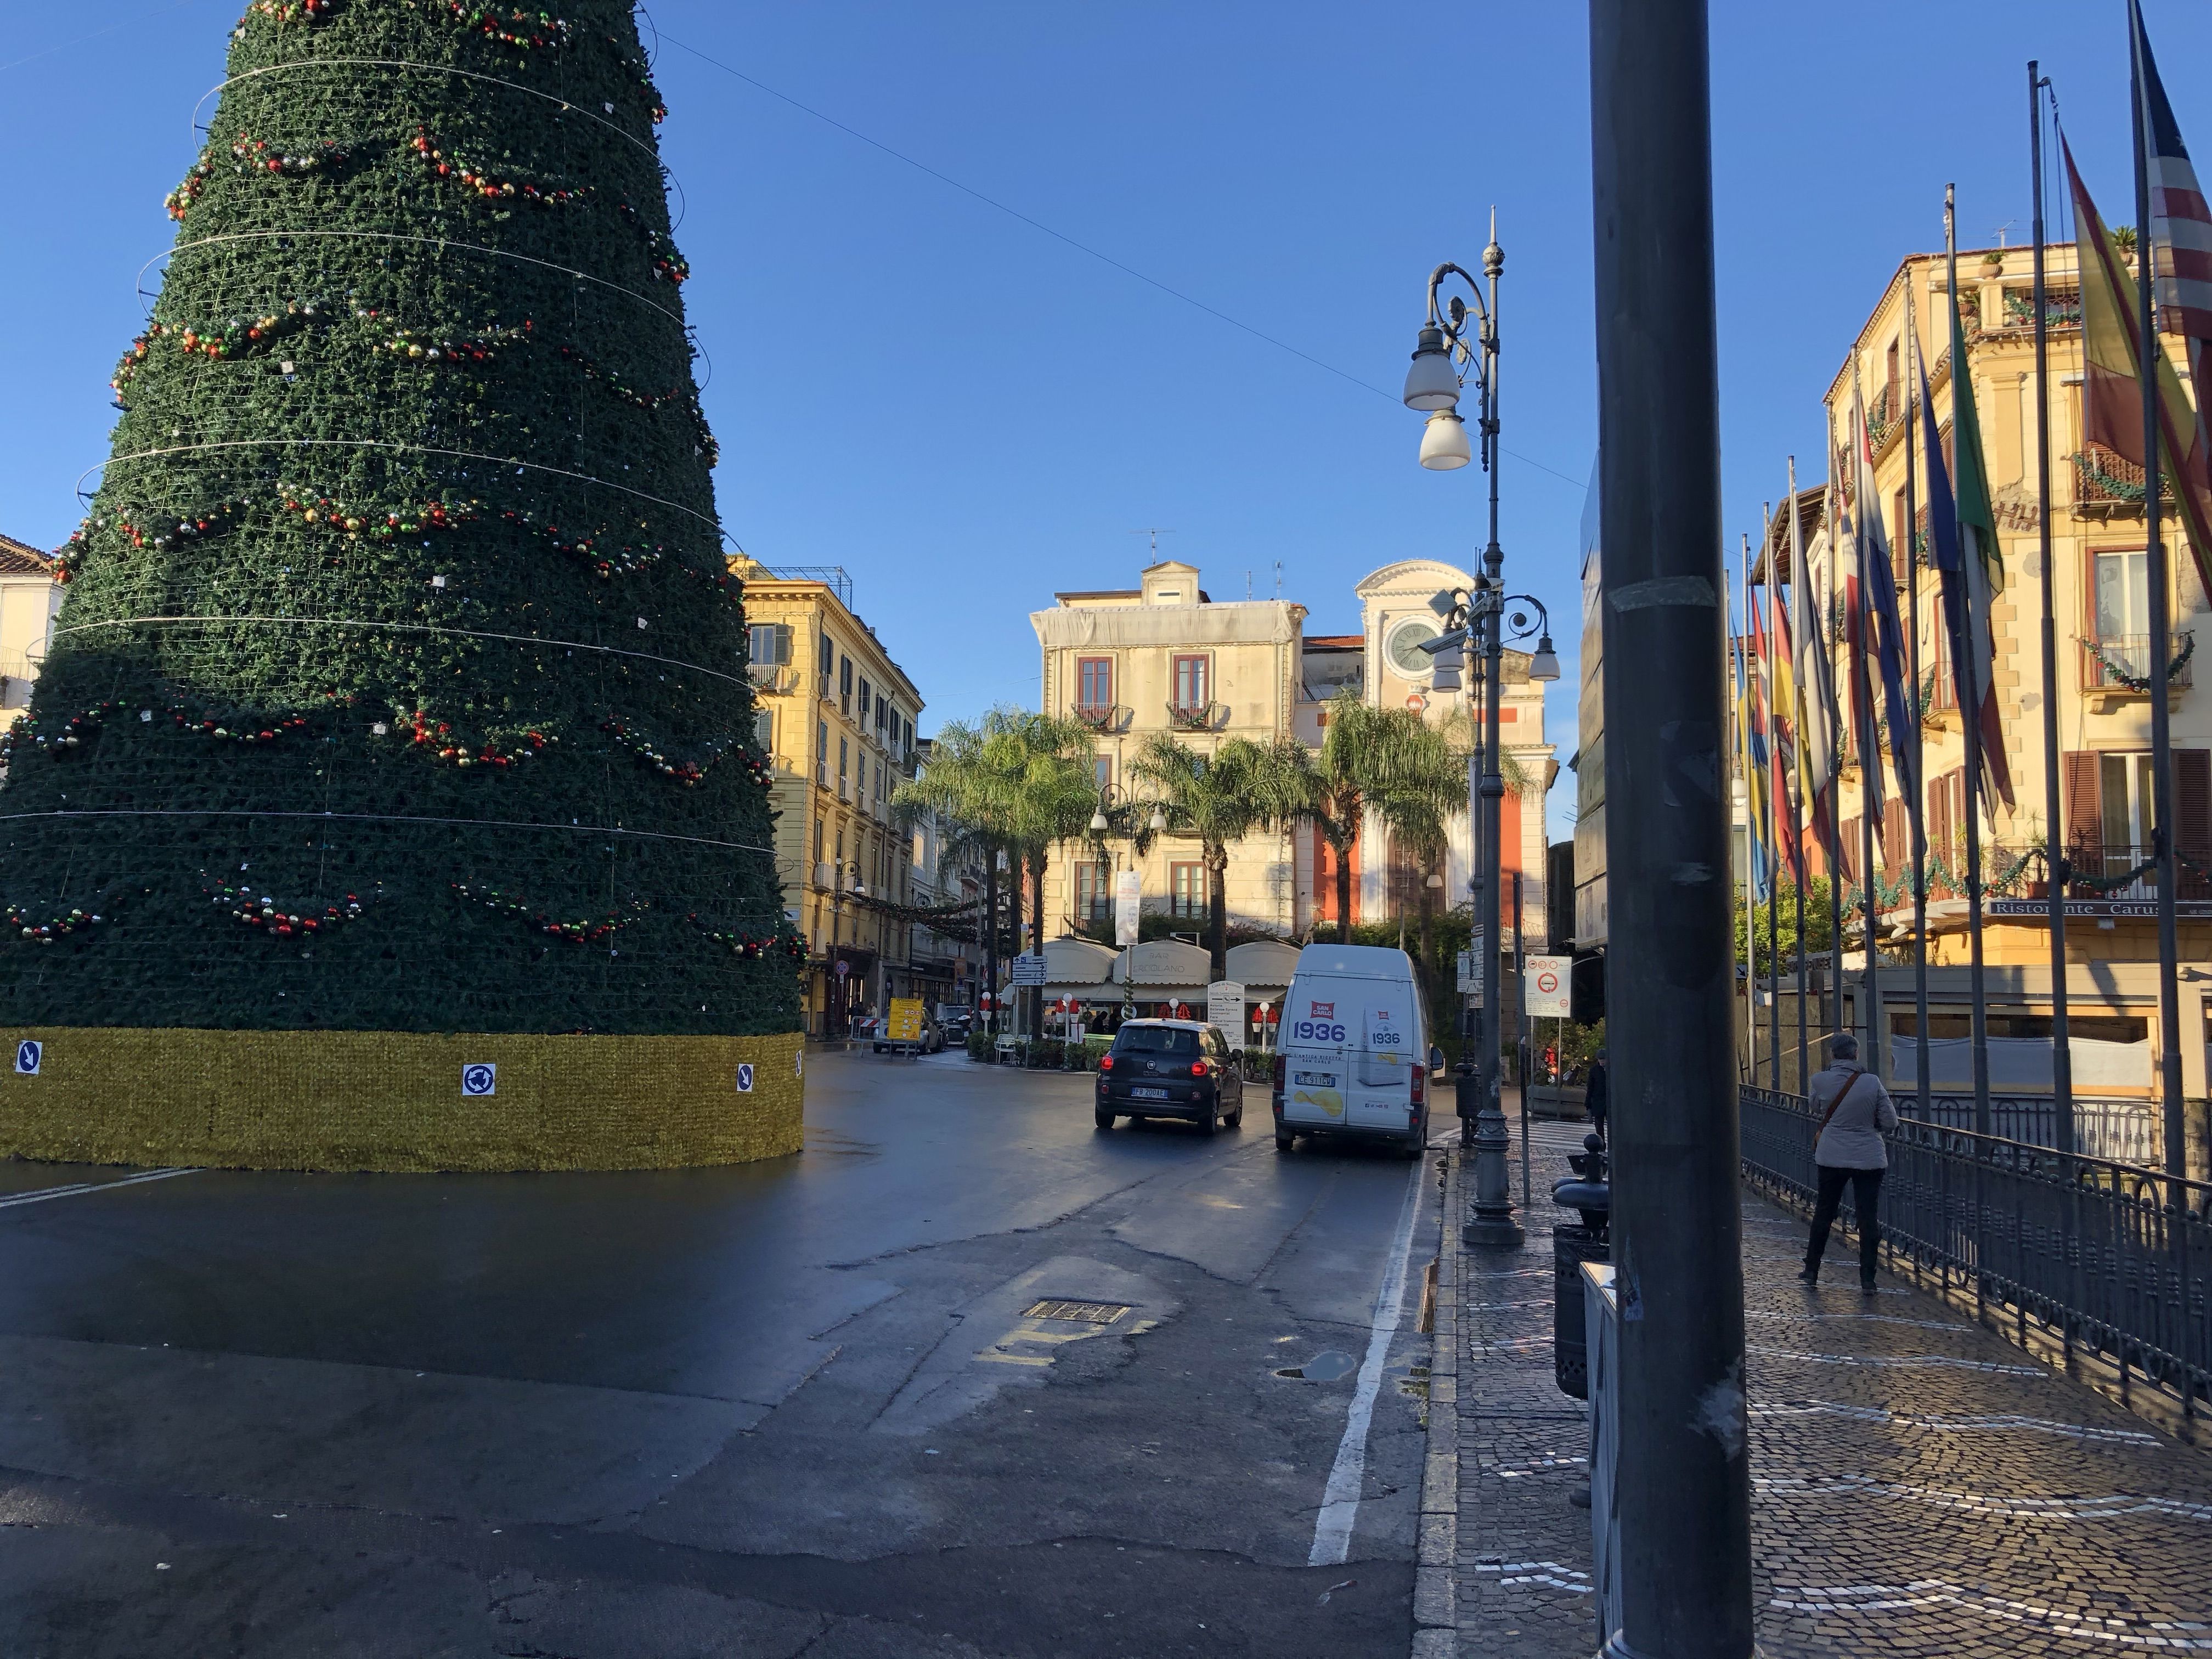 Tasso Square in the centre of Sorrento. On the left, a big conical fake Christmas tree. On the right, an old building with a row flagpoles out the front. In the centre a restaurant behind a row of palm trees.